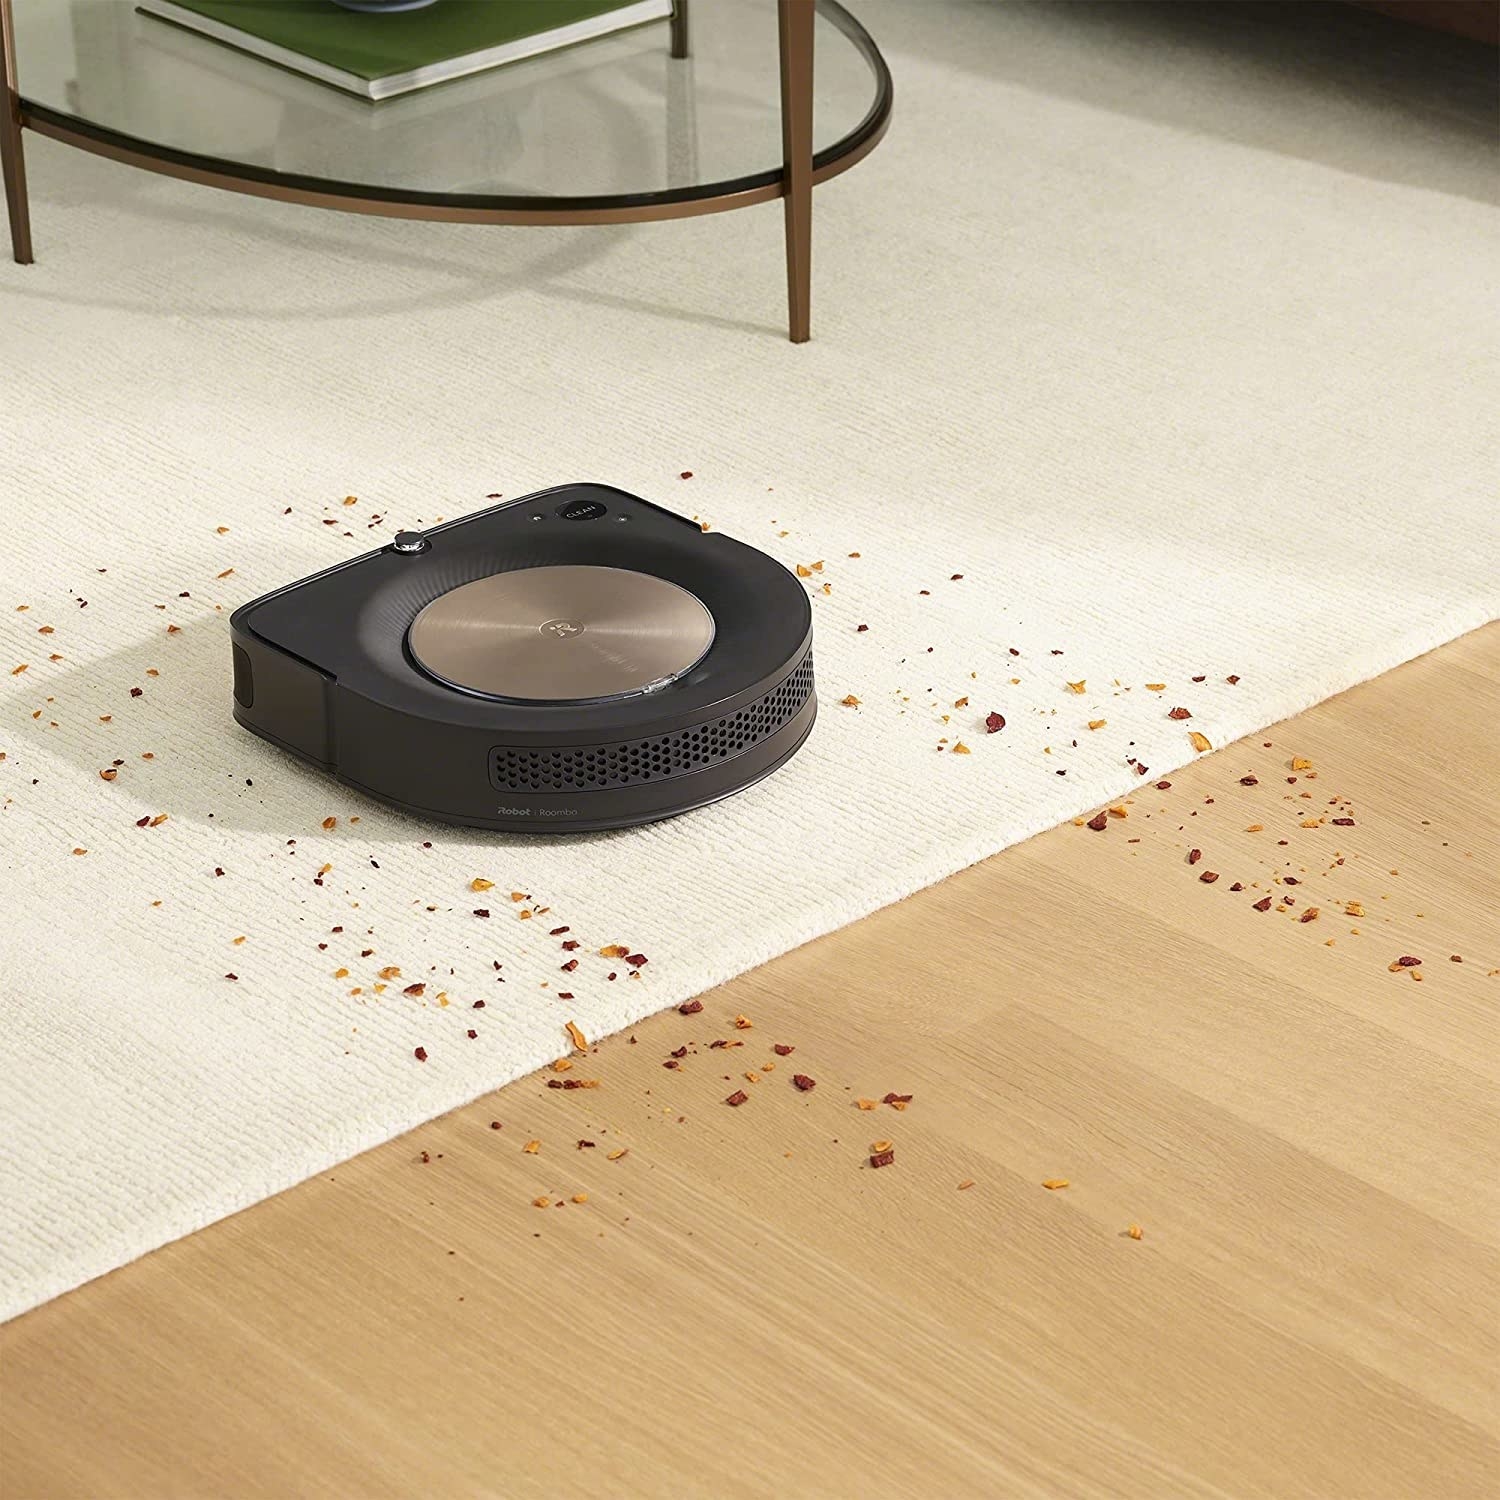 A Roomba Cleaning up a mess on a floor